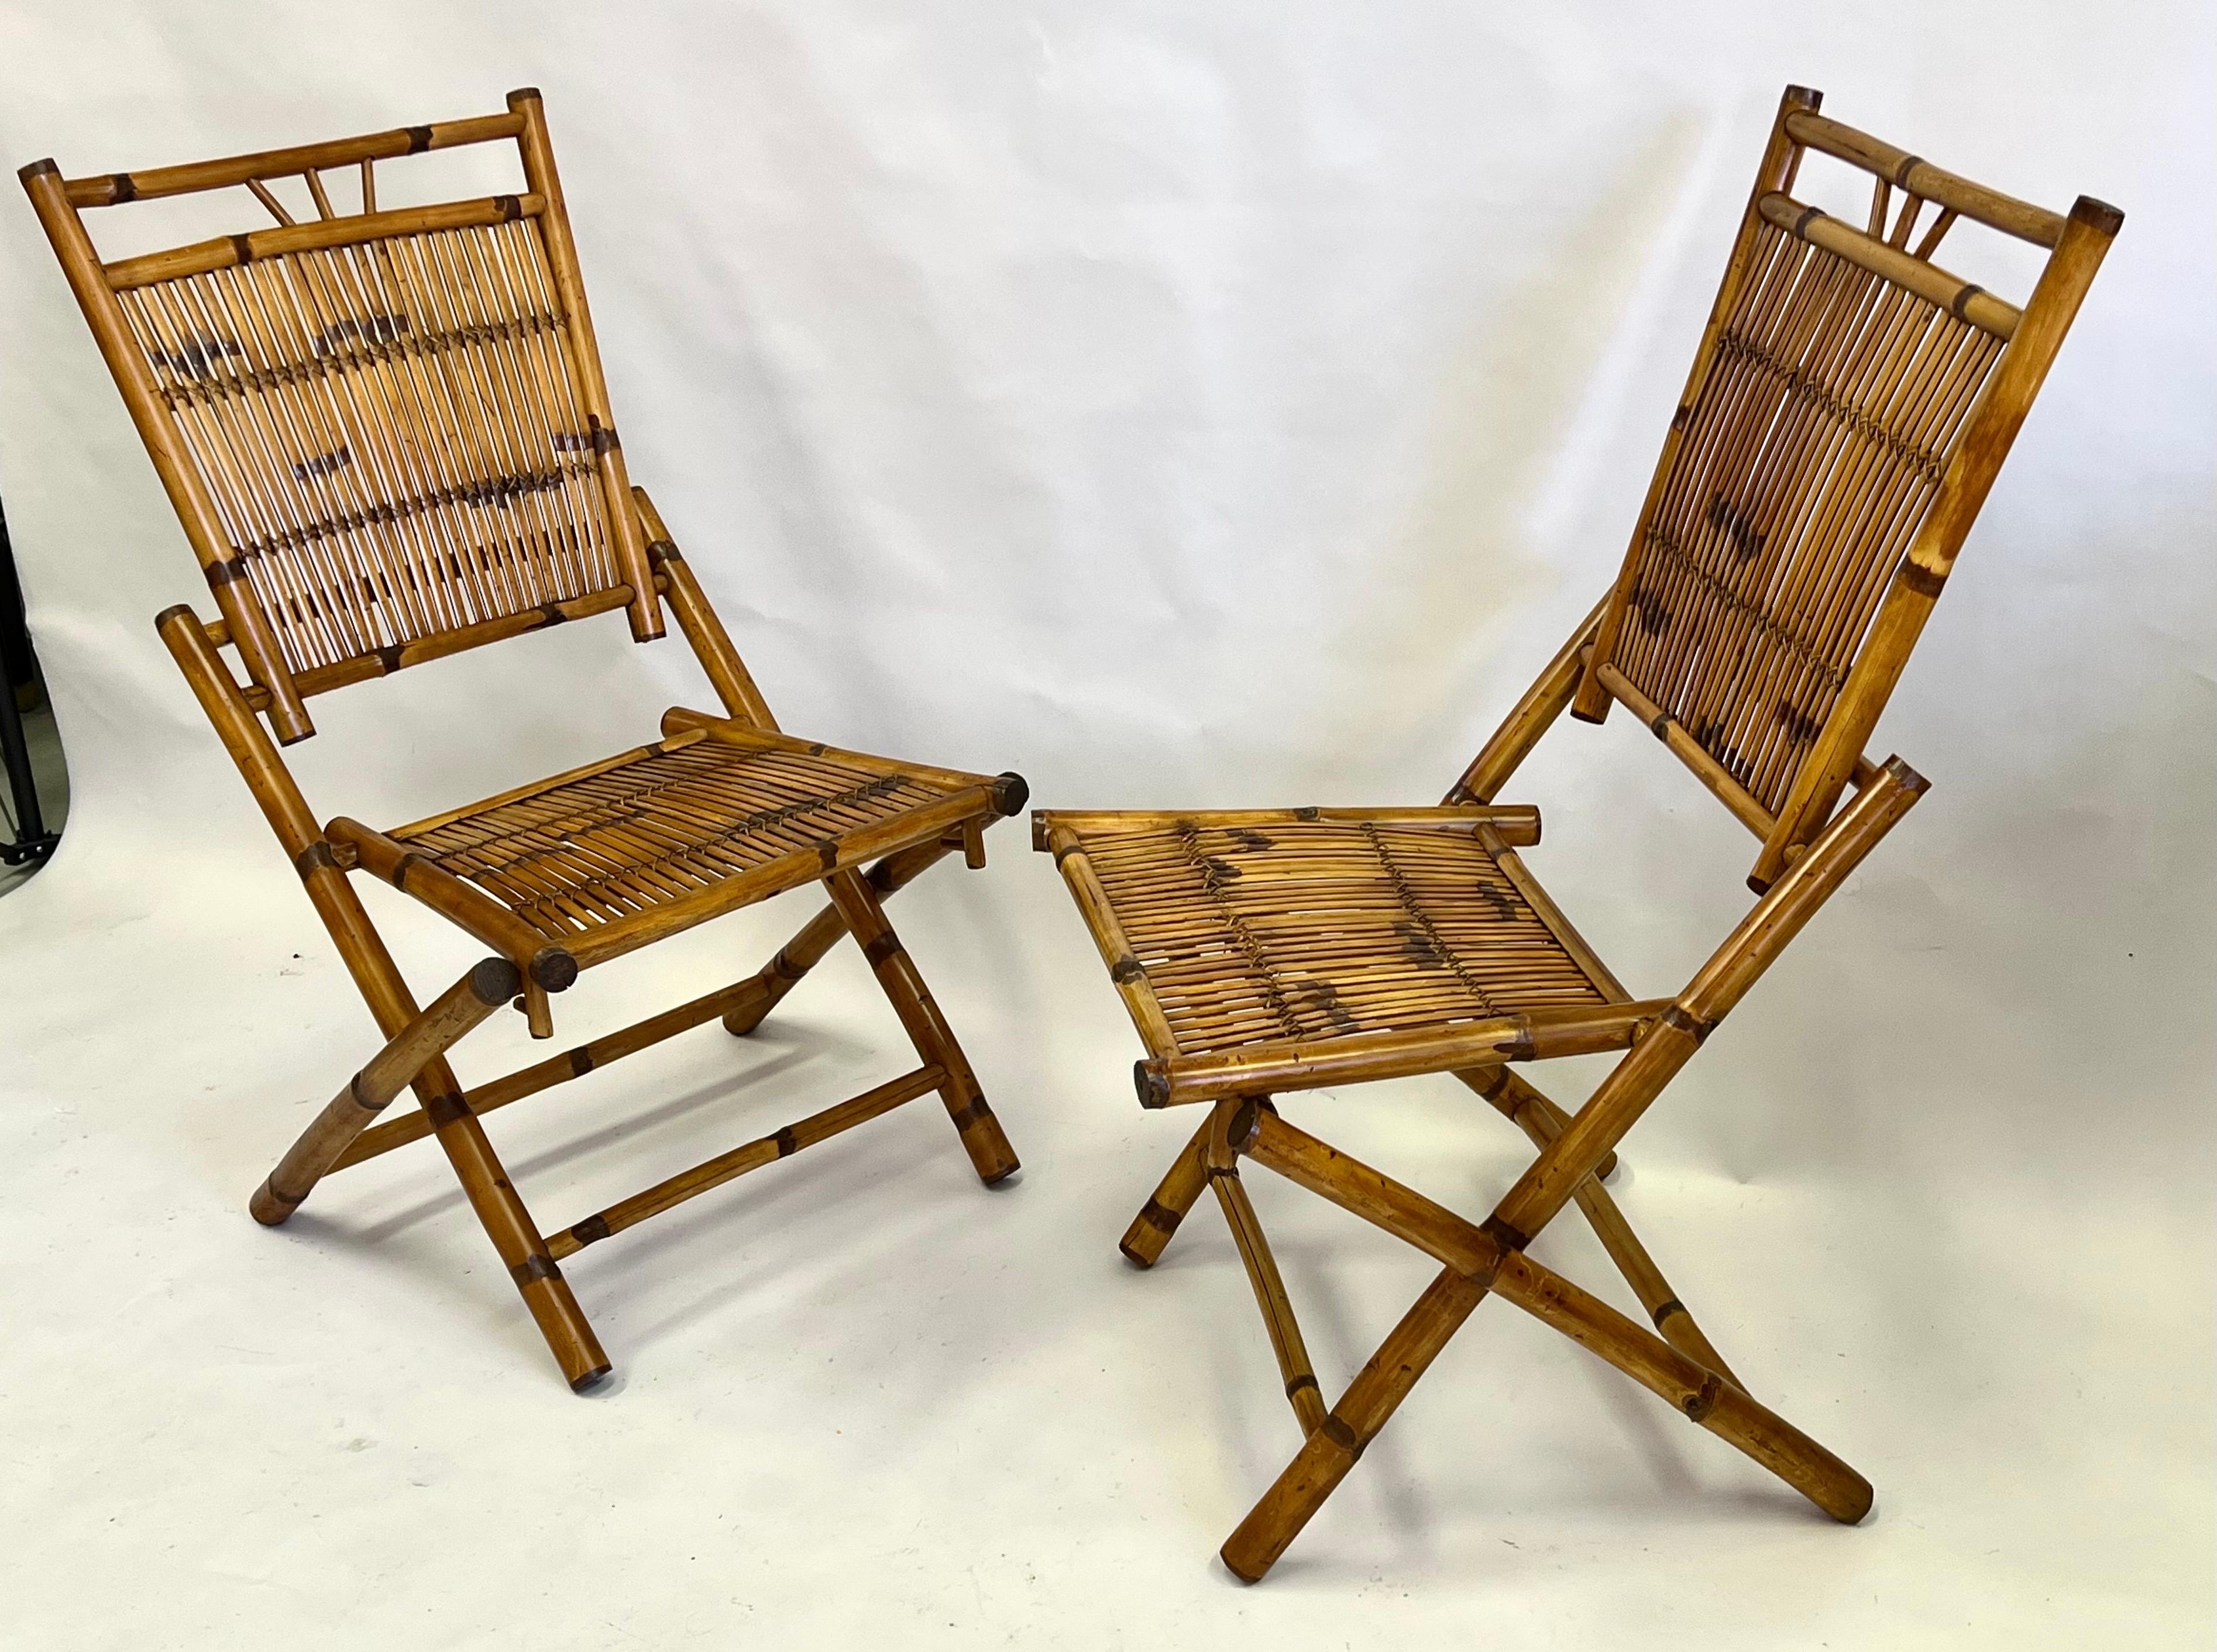 A Rare and Elegant pair of French Mid-Century Modern Neoclassical Rattan and bamboo side chairs or lounge chairs. The chairs unite sober neoclassical sensibilities with a modern look. The pieces have a classic X-form leg structure and are